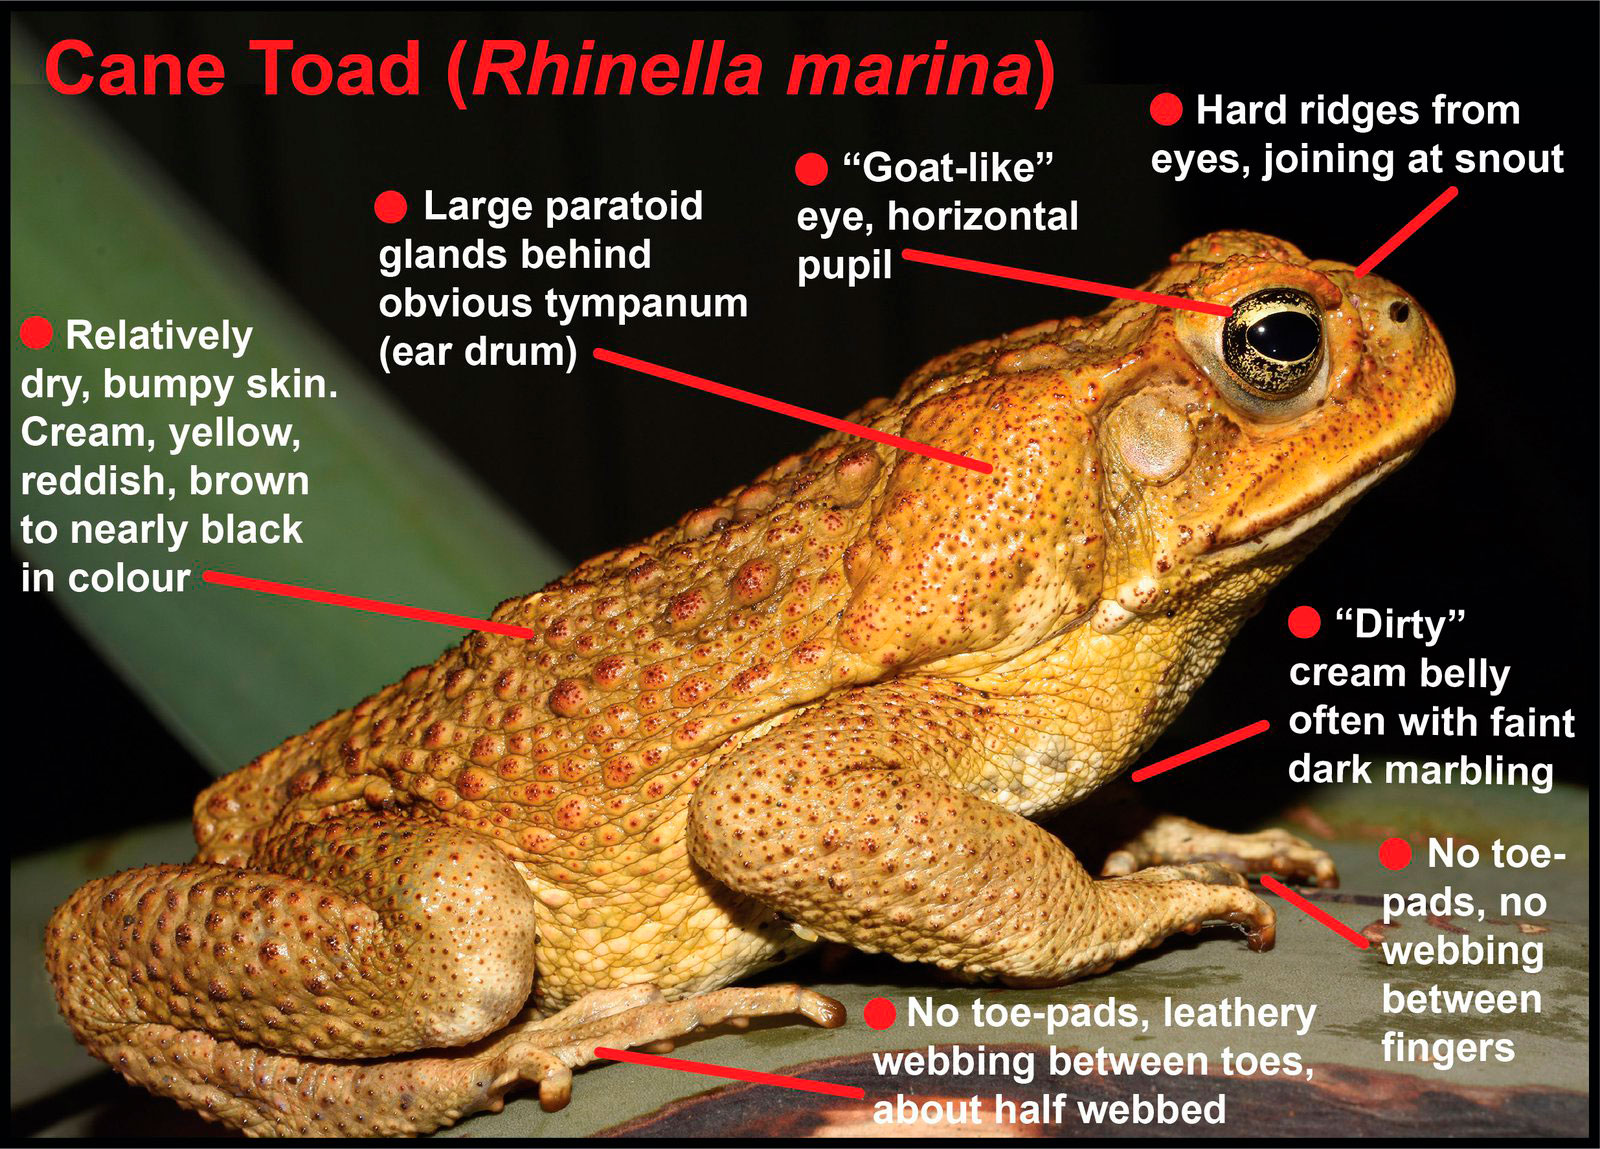 Cane toad.